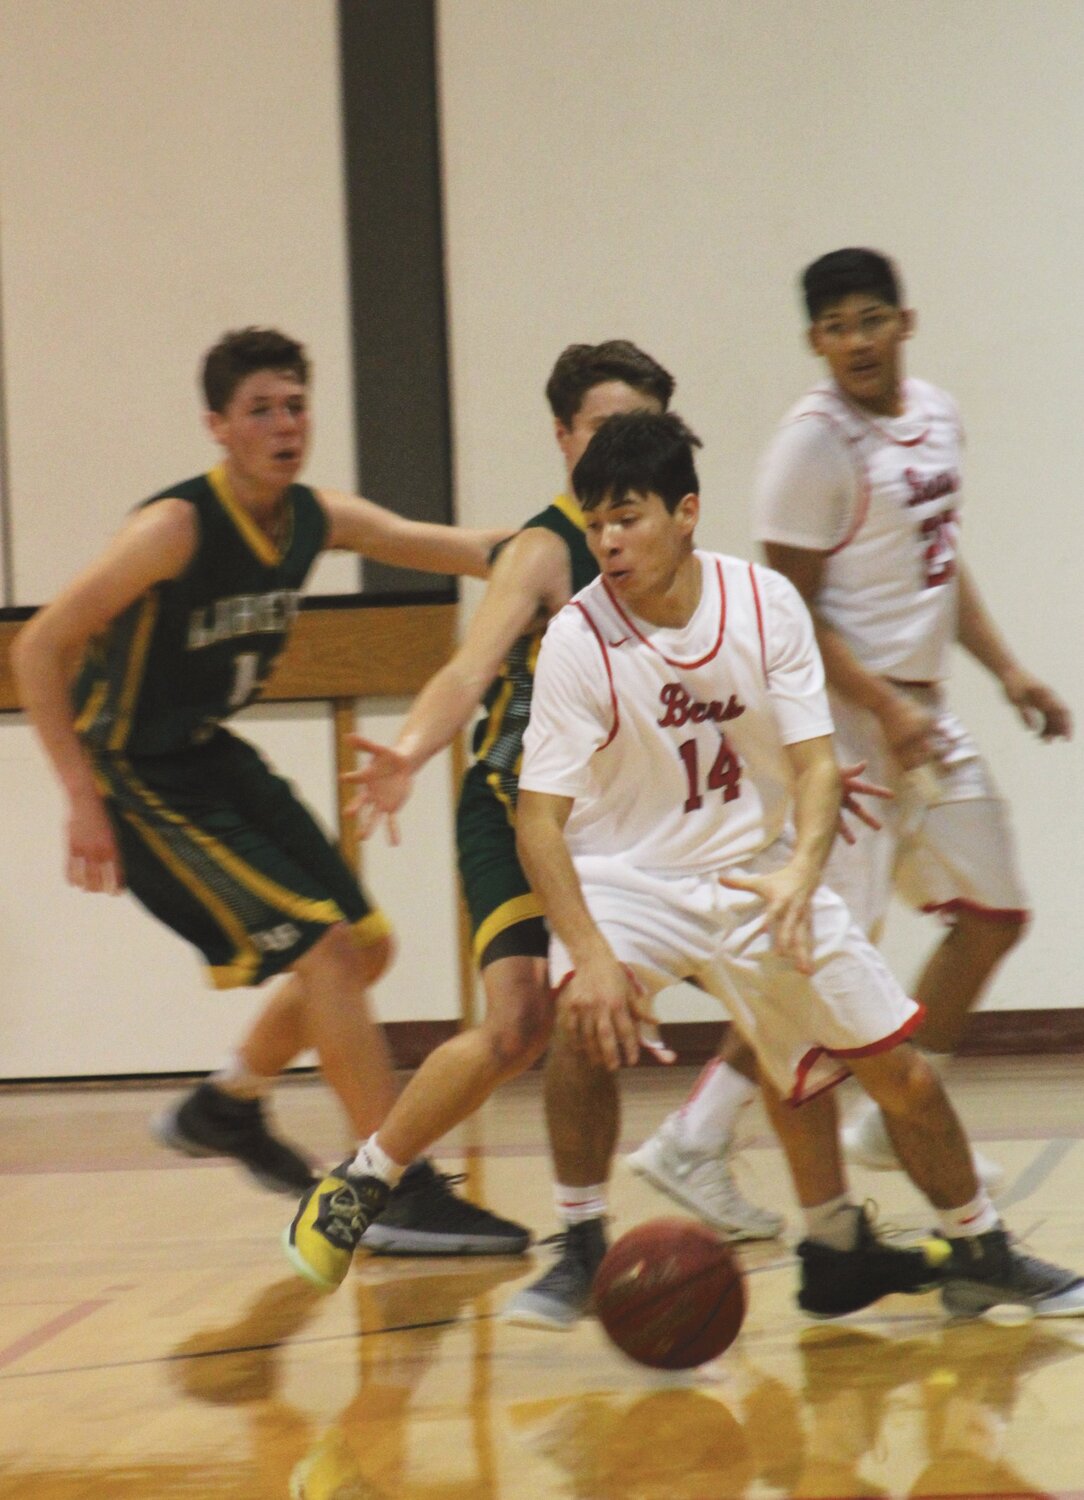 Bears junior guard Ernie Nanamkin (14) looks for an opening against a pair of Mountain Lions’ defenders.